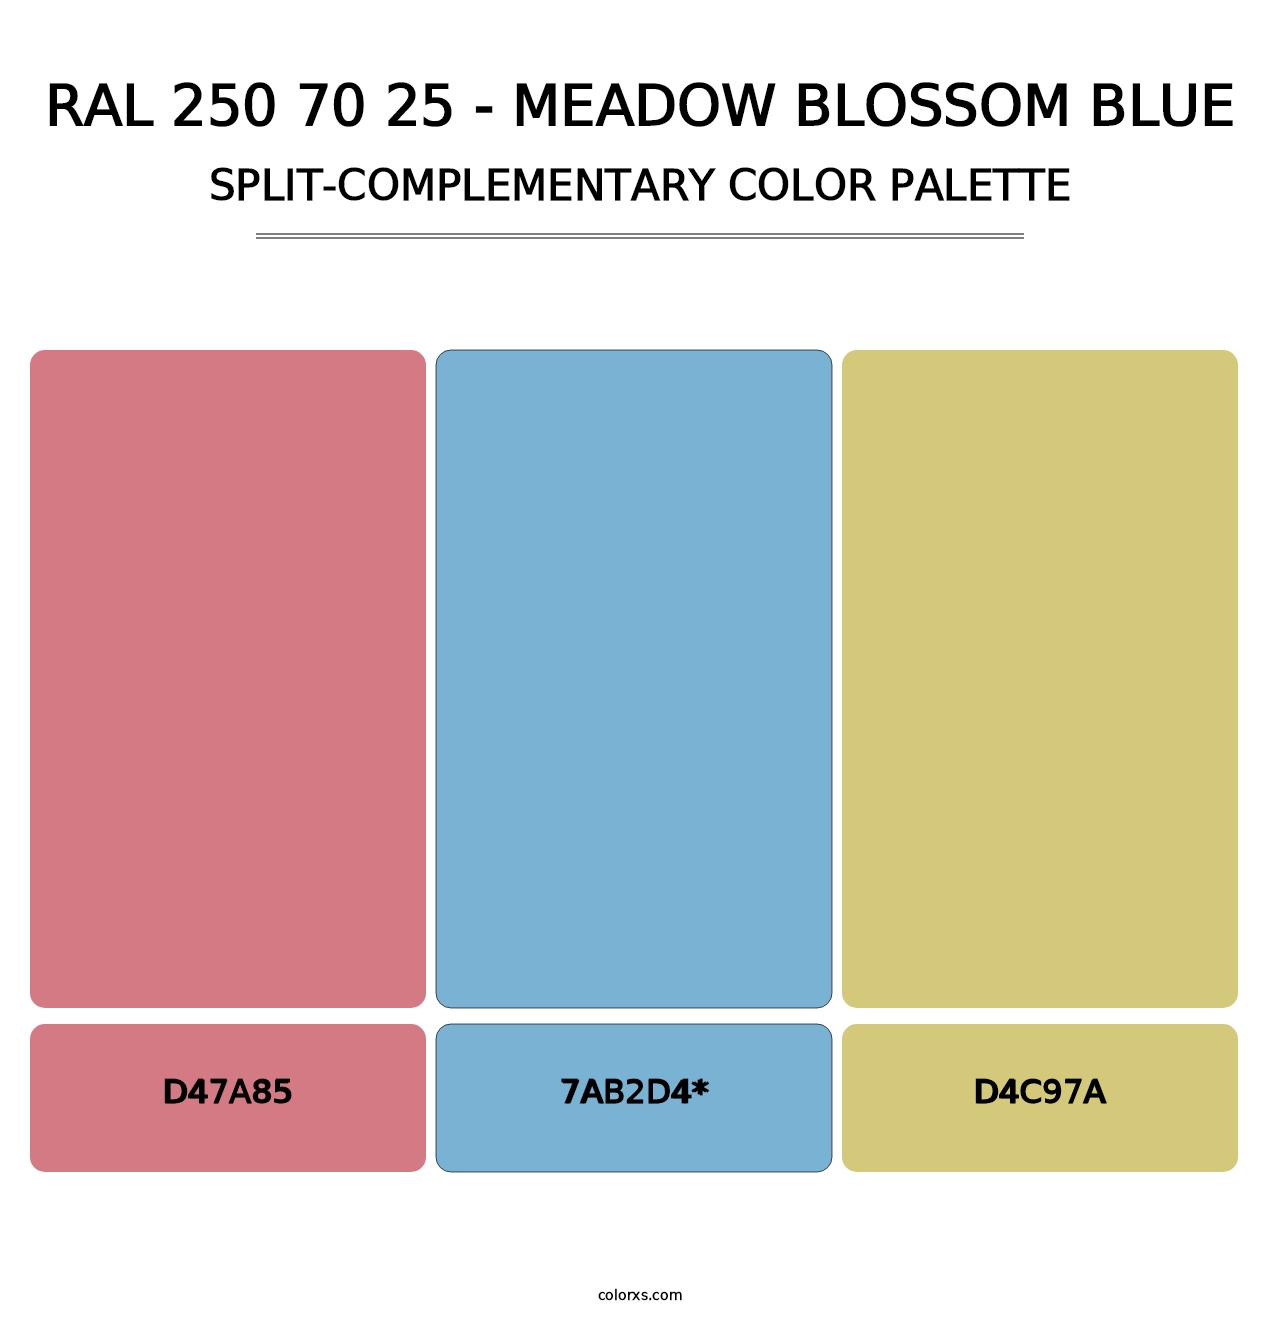 RAL 250 70 25 - Meadow Blossom Blue - Split-Complementary Color Palette